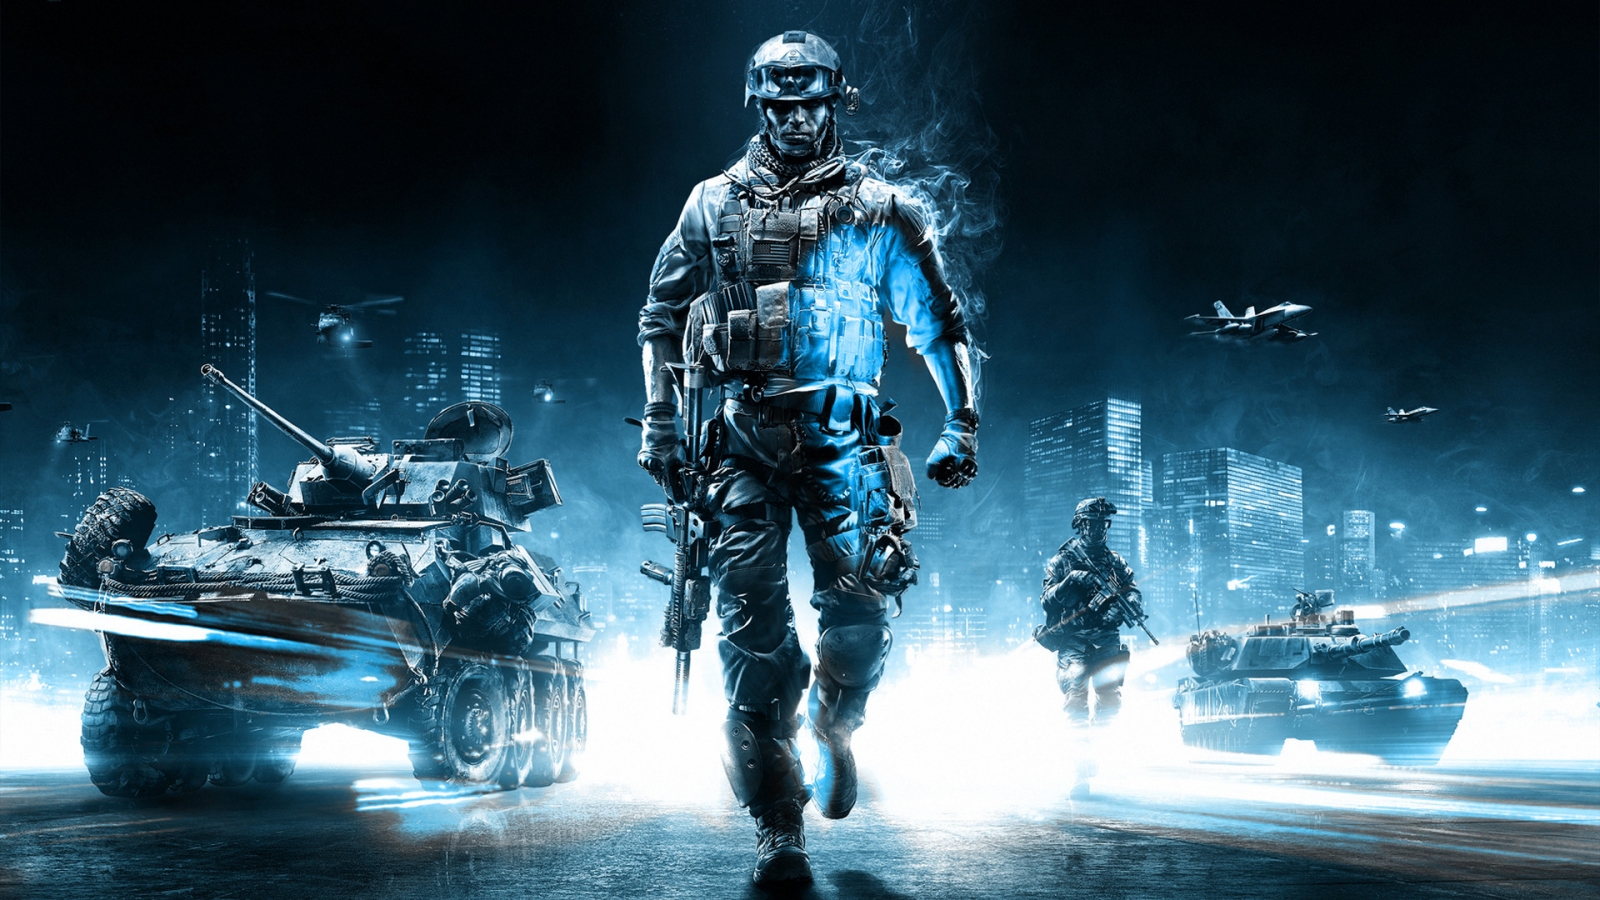 Battlefield 3 Action Game for 1600 x 900 HDTV resolution